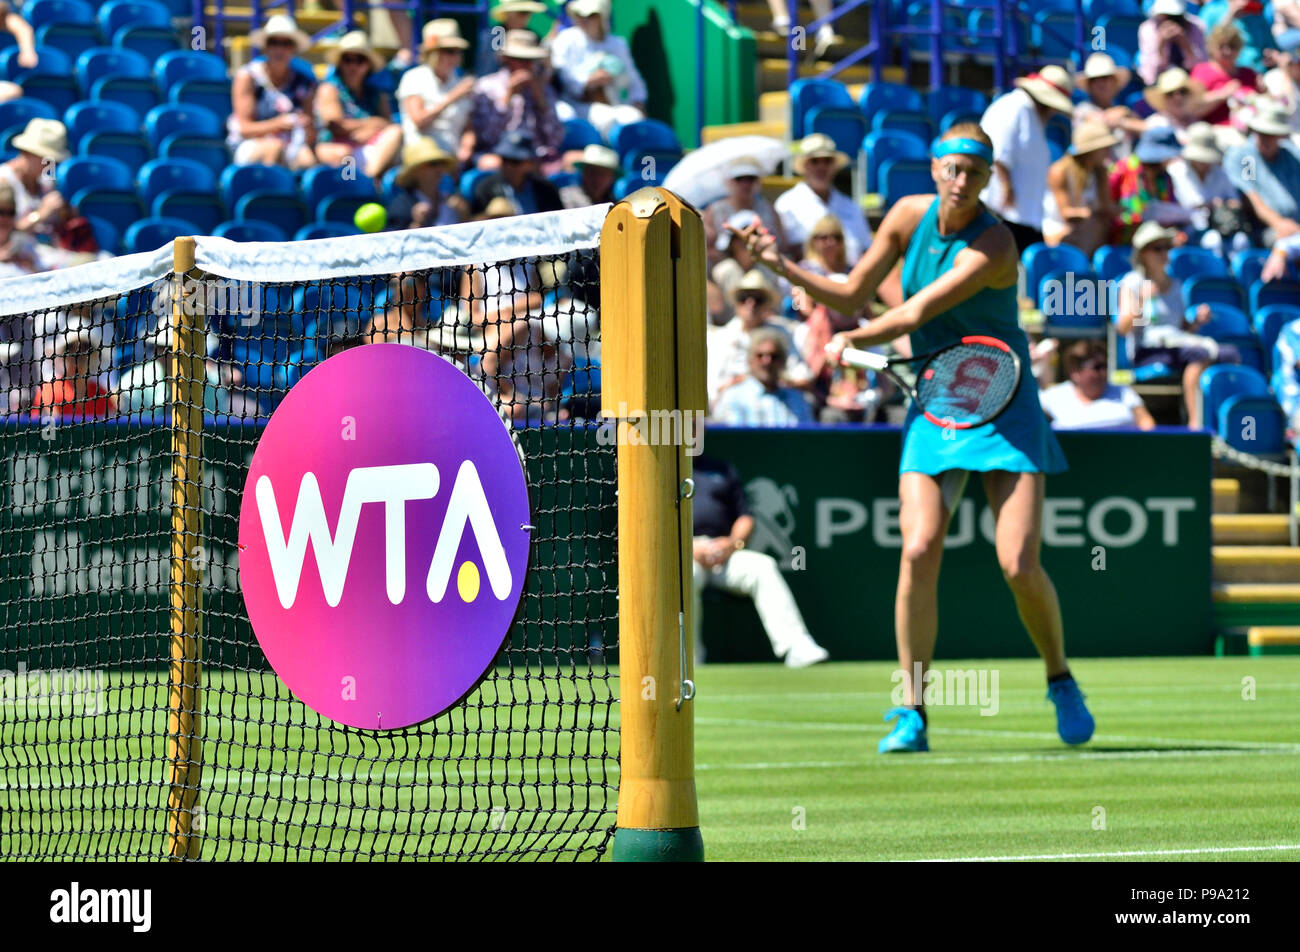 Petra Kvitova (CZE) playing at the Nature Valley International, Eastbourne 26th June 2018 - WTA logo in focus on the net Stock Photo